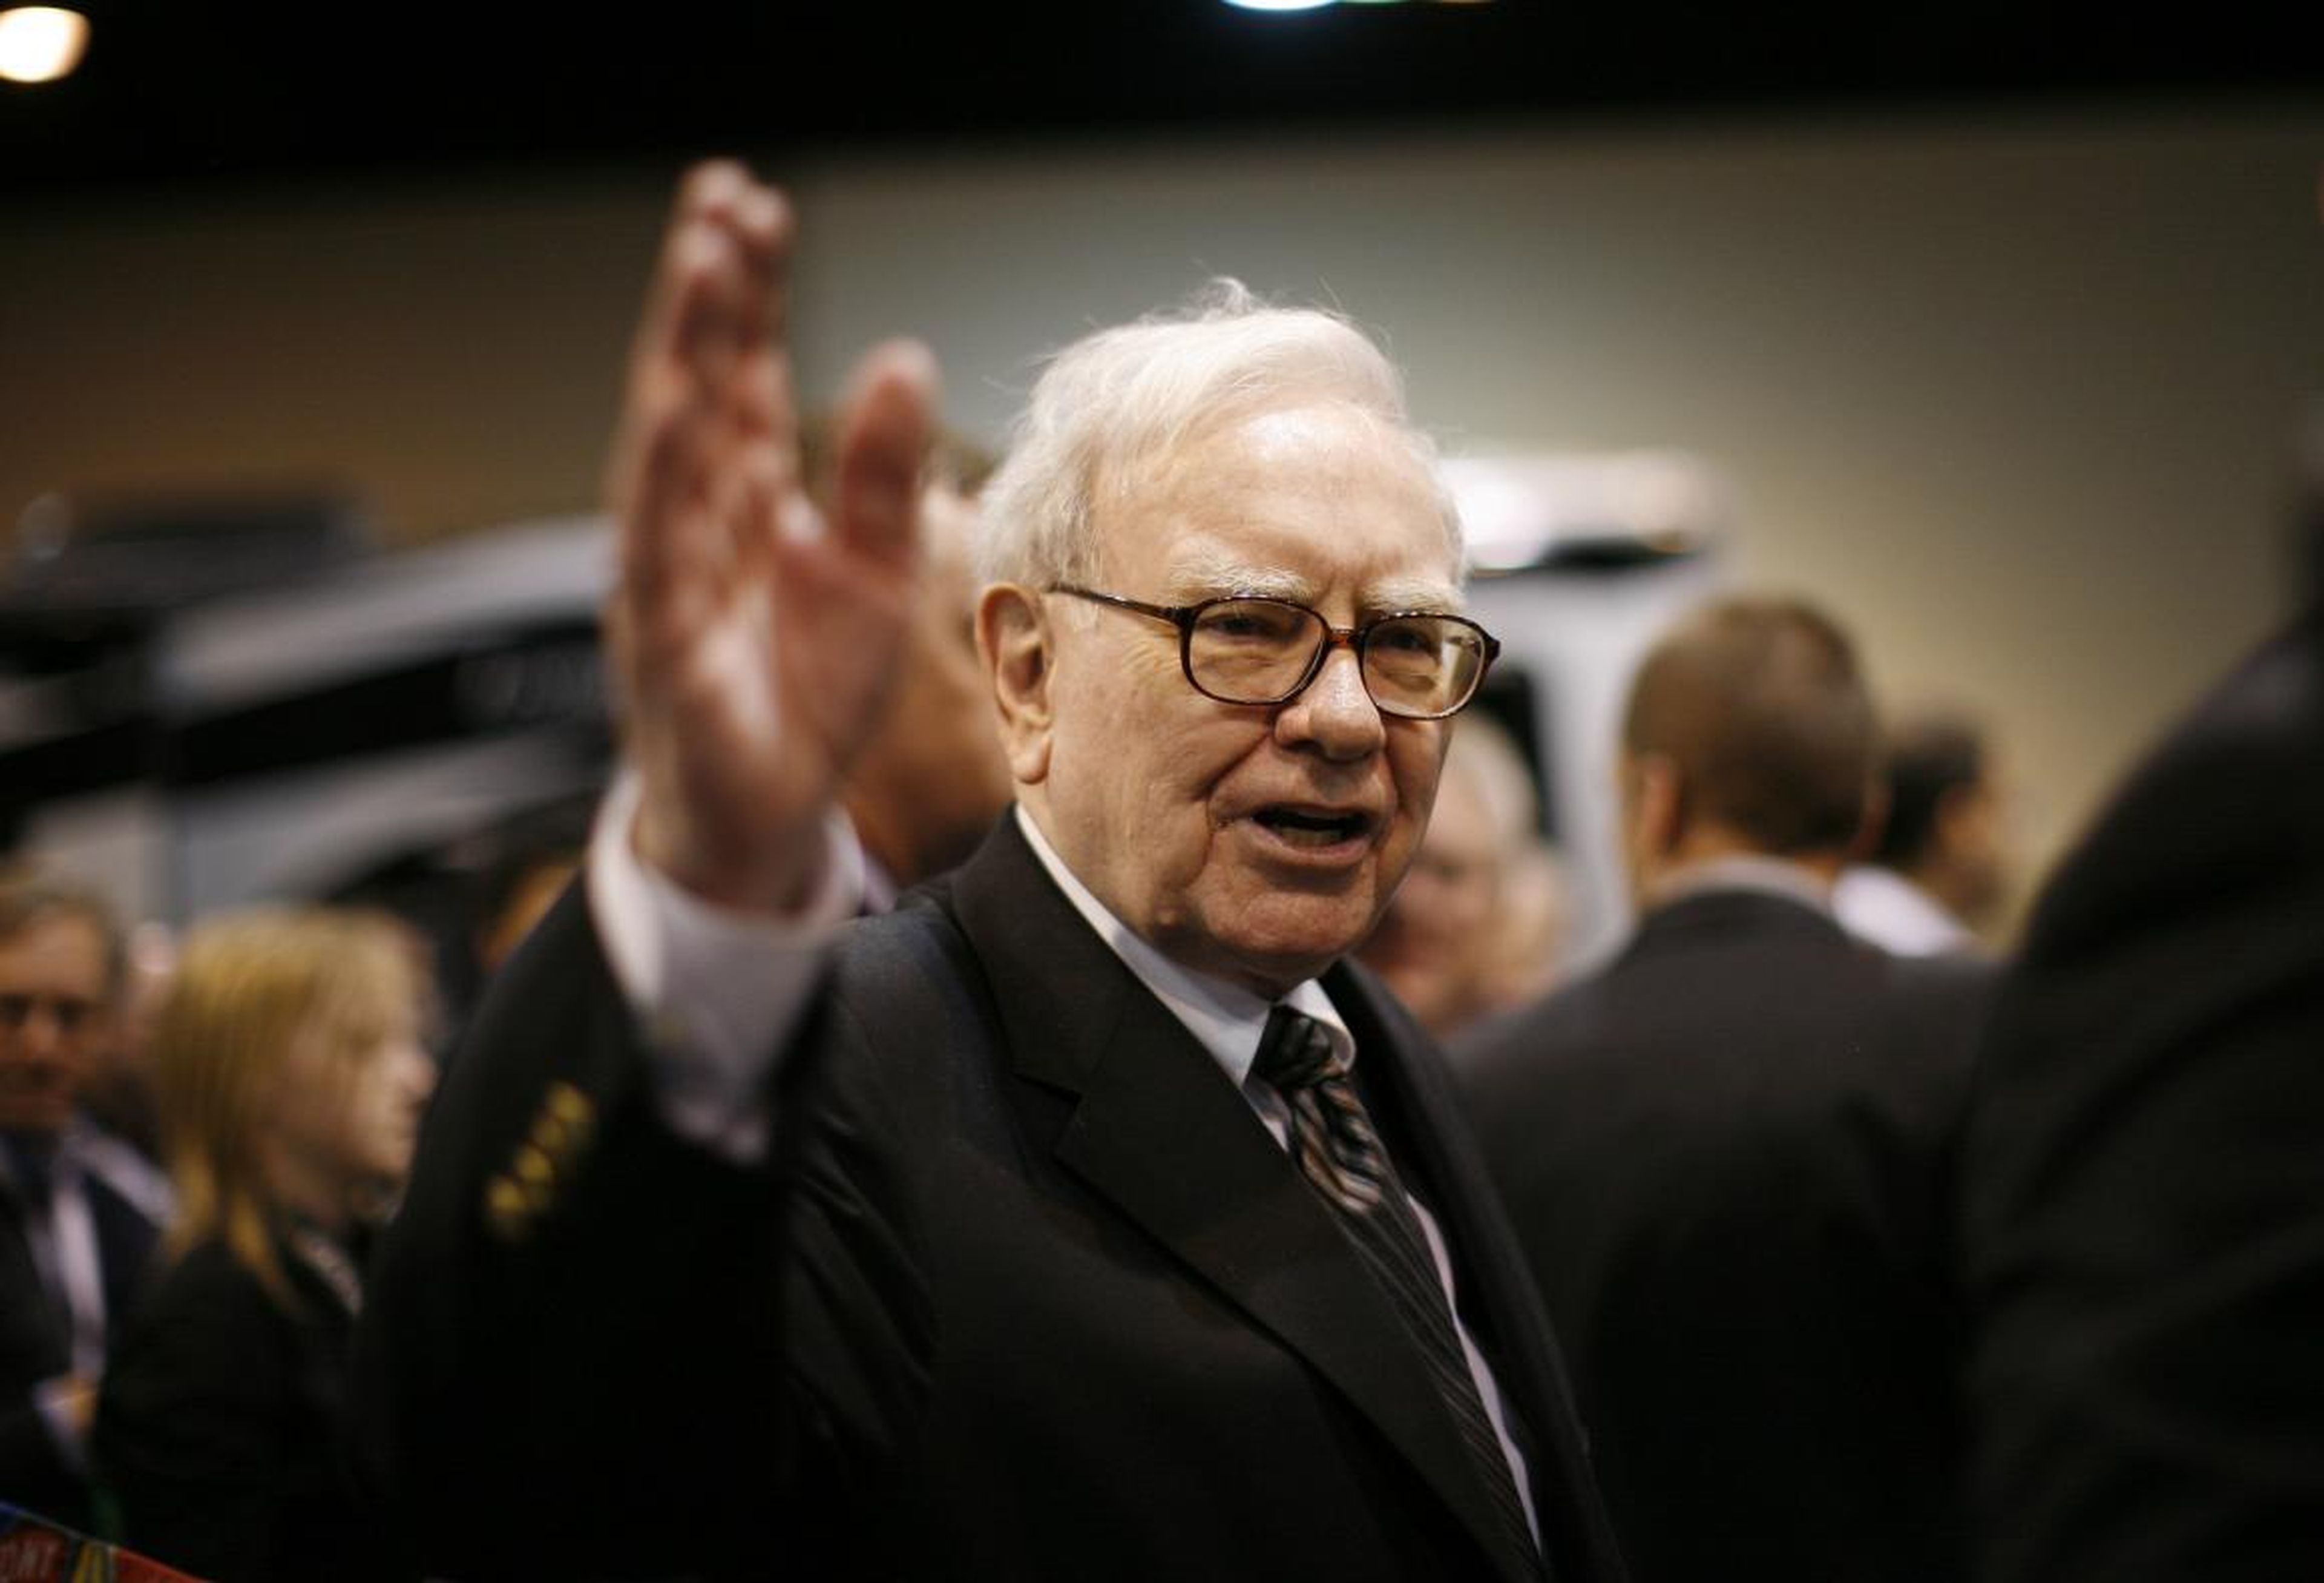 Here are the 21 most brilliant quotes from Warren Buffett, the world's most famous and successful investor